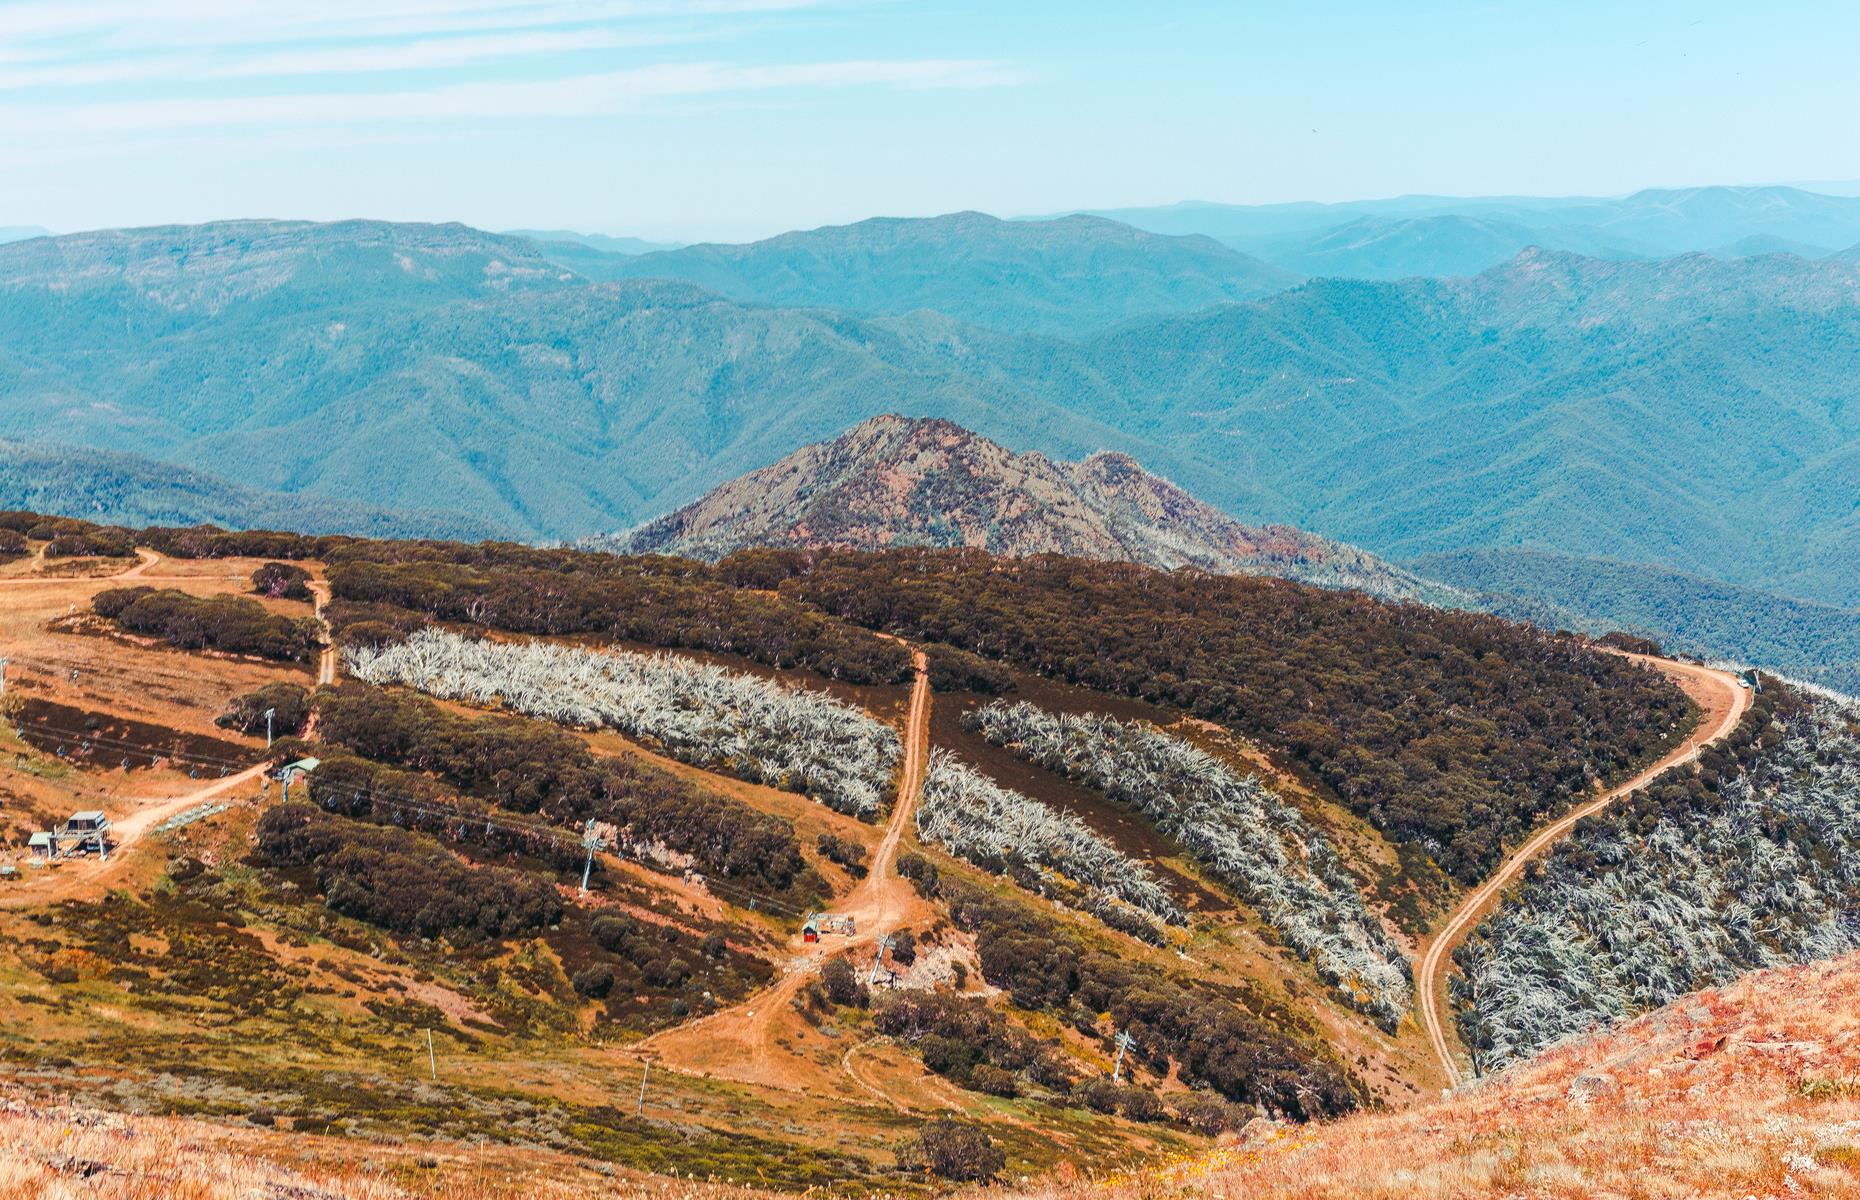 <p>Head into Victoria’s lofty mountain ranges on the <a href="https://www.visitvictoria.com/see-and-do/road-trips-and-itineraries/The-Great-Alpine-Road">Great Alpine Road</a> for a dose of crisp mountain air and big sky views. The route stretches from Wangaratta through the Ovens Valley to Harrietville, up and over the alpine resort of Mount Hotham, then down again to the coastal village of Metung on the Gippsland Lakes. Covering 211 miles (339km) in total, this drive takes you along Australia's highest year-round accessible sealed road. As well as soaring peaks and plunging valleys, you’ll pass Gold Rush-era towns, thick forests, undulating vineyards and wildlife-rich waterways.</p>